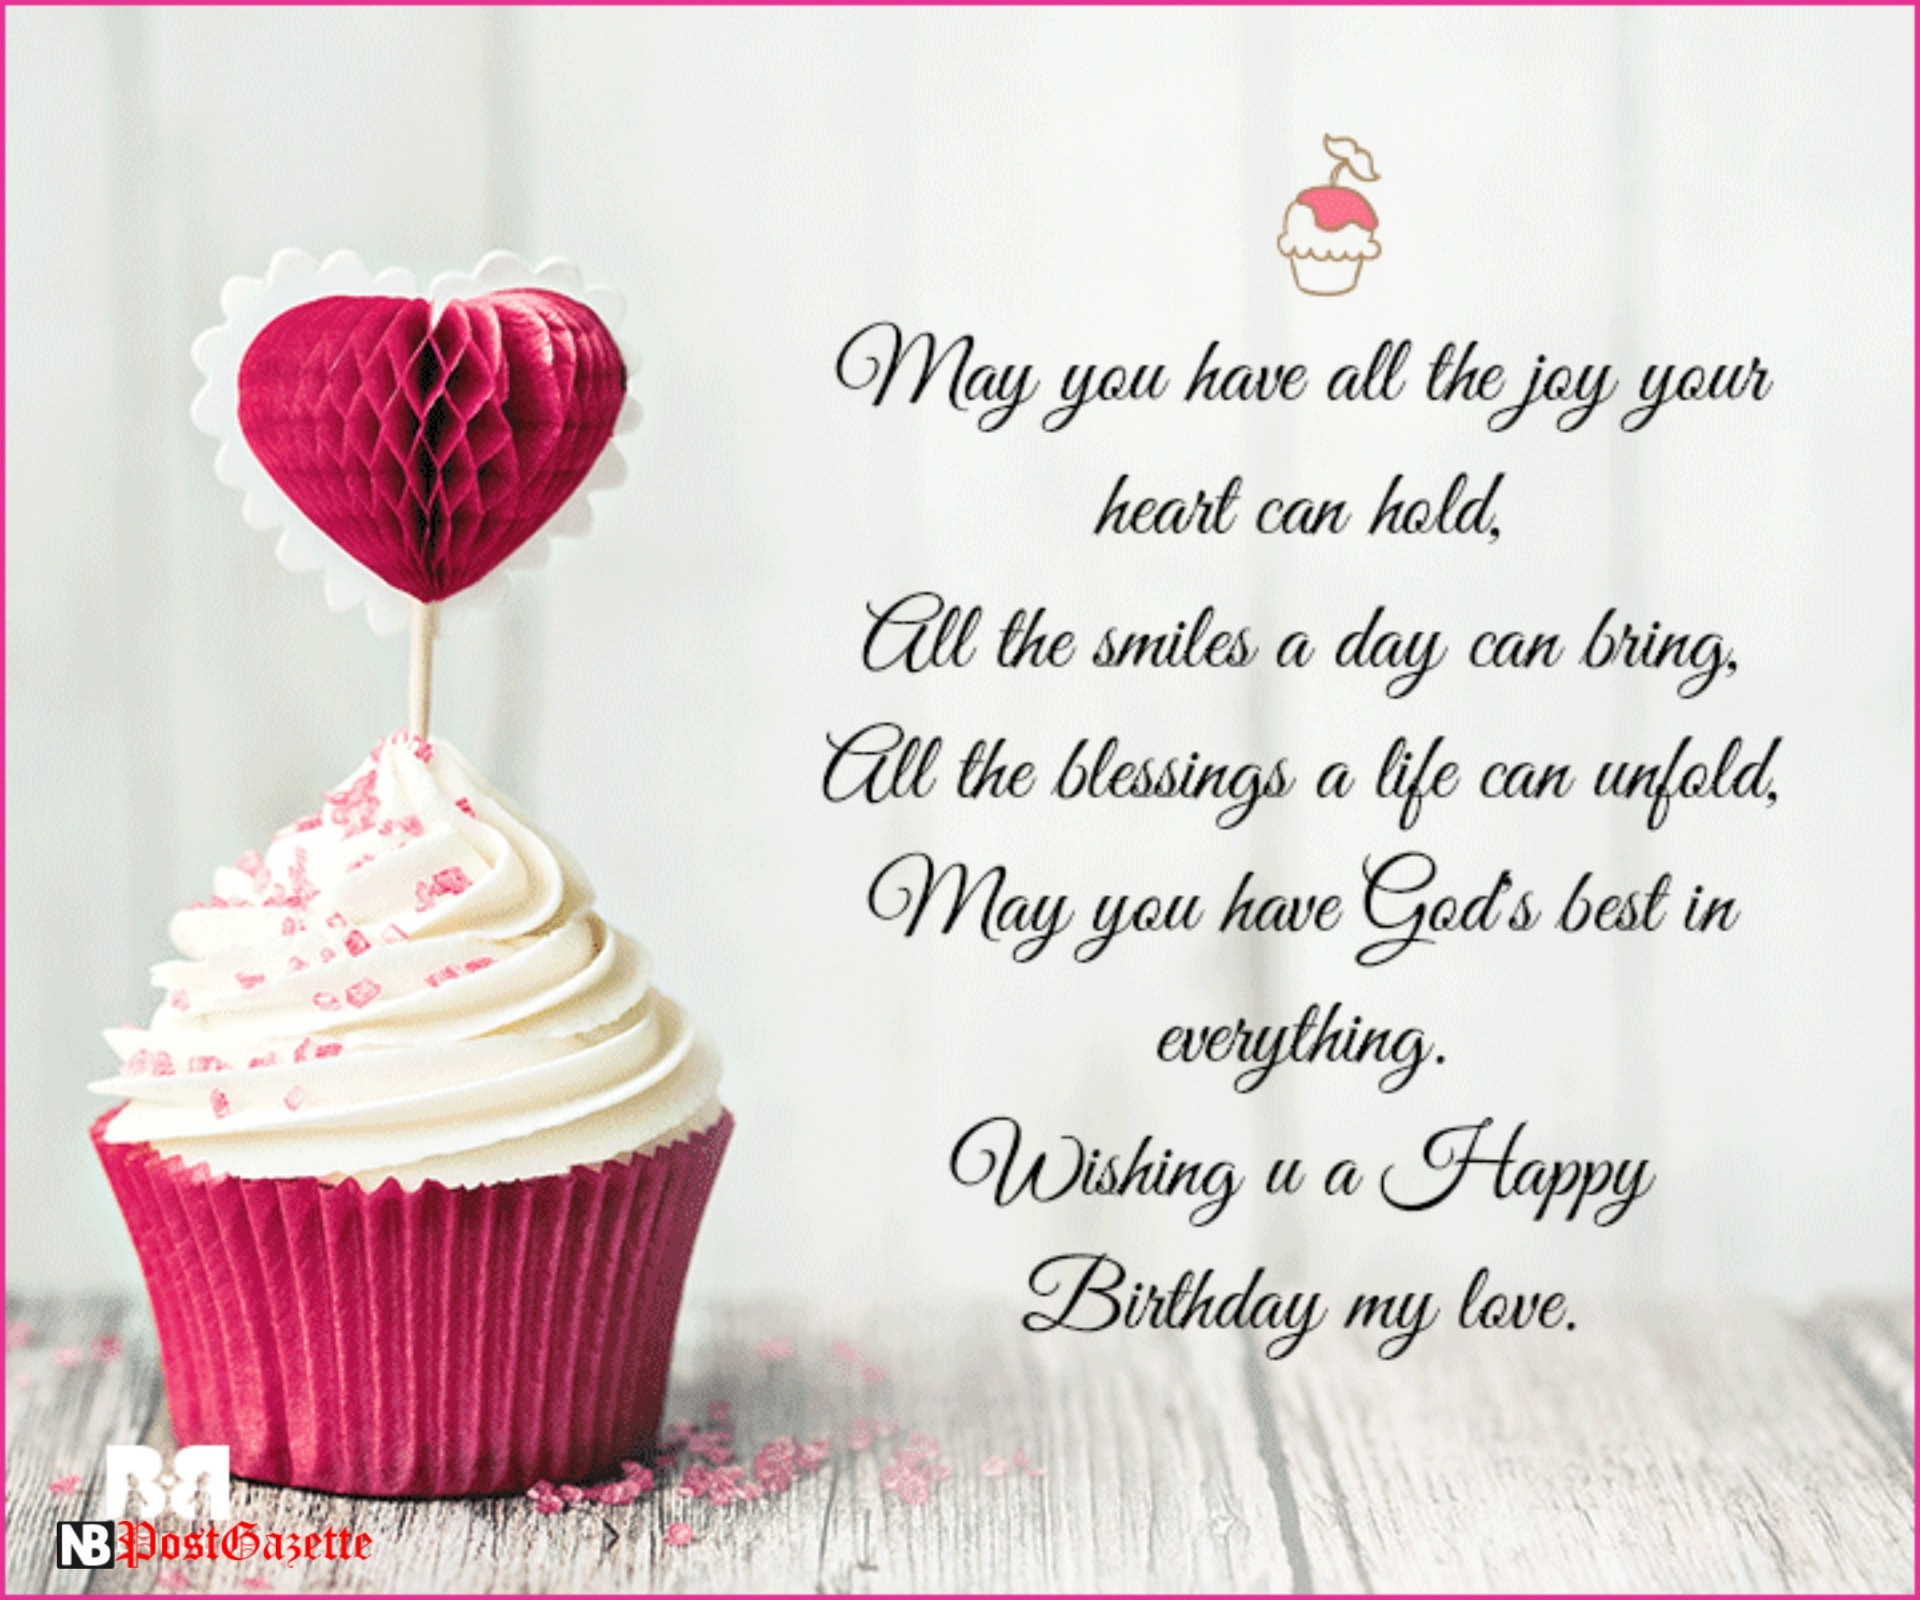 Happy Birthday To Someone Special Quotes
 Top Best Happy Birthday Wishes SMS Quotes & Text Messages